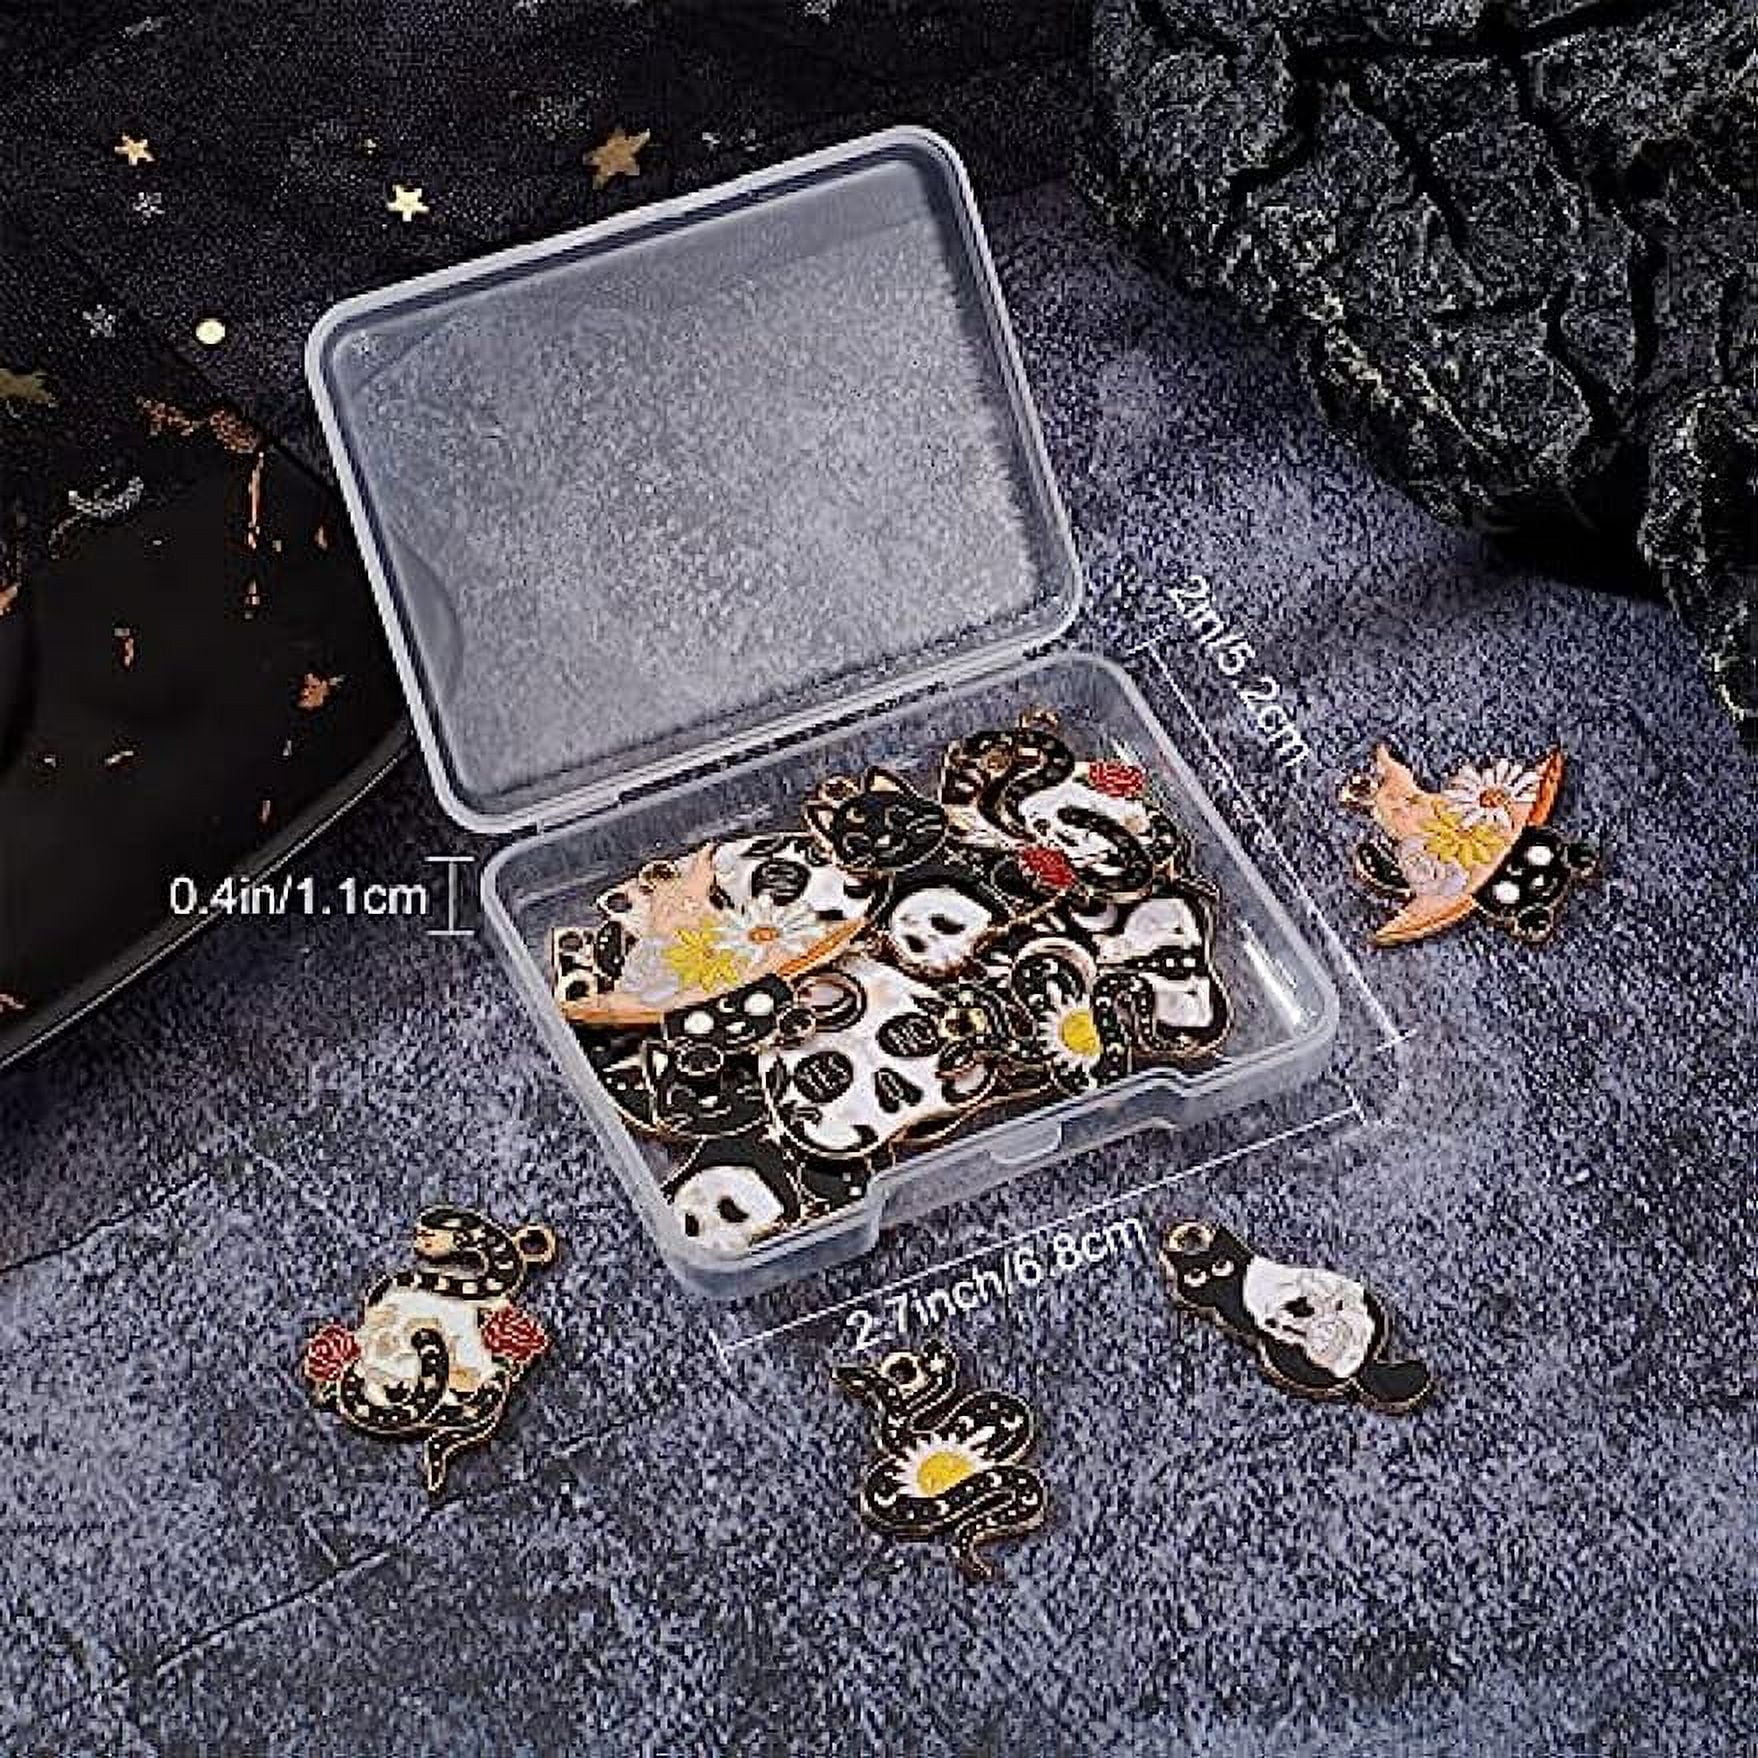 24Pcs 4 Styles Halloween Gothic Charms Tarot Charms Bulk Black and White  Magic Charms Moon Cat Skull Energy Charm for Jewelry Making Charms DIY